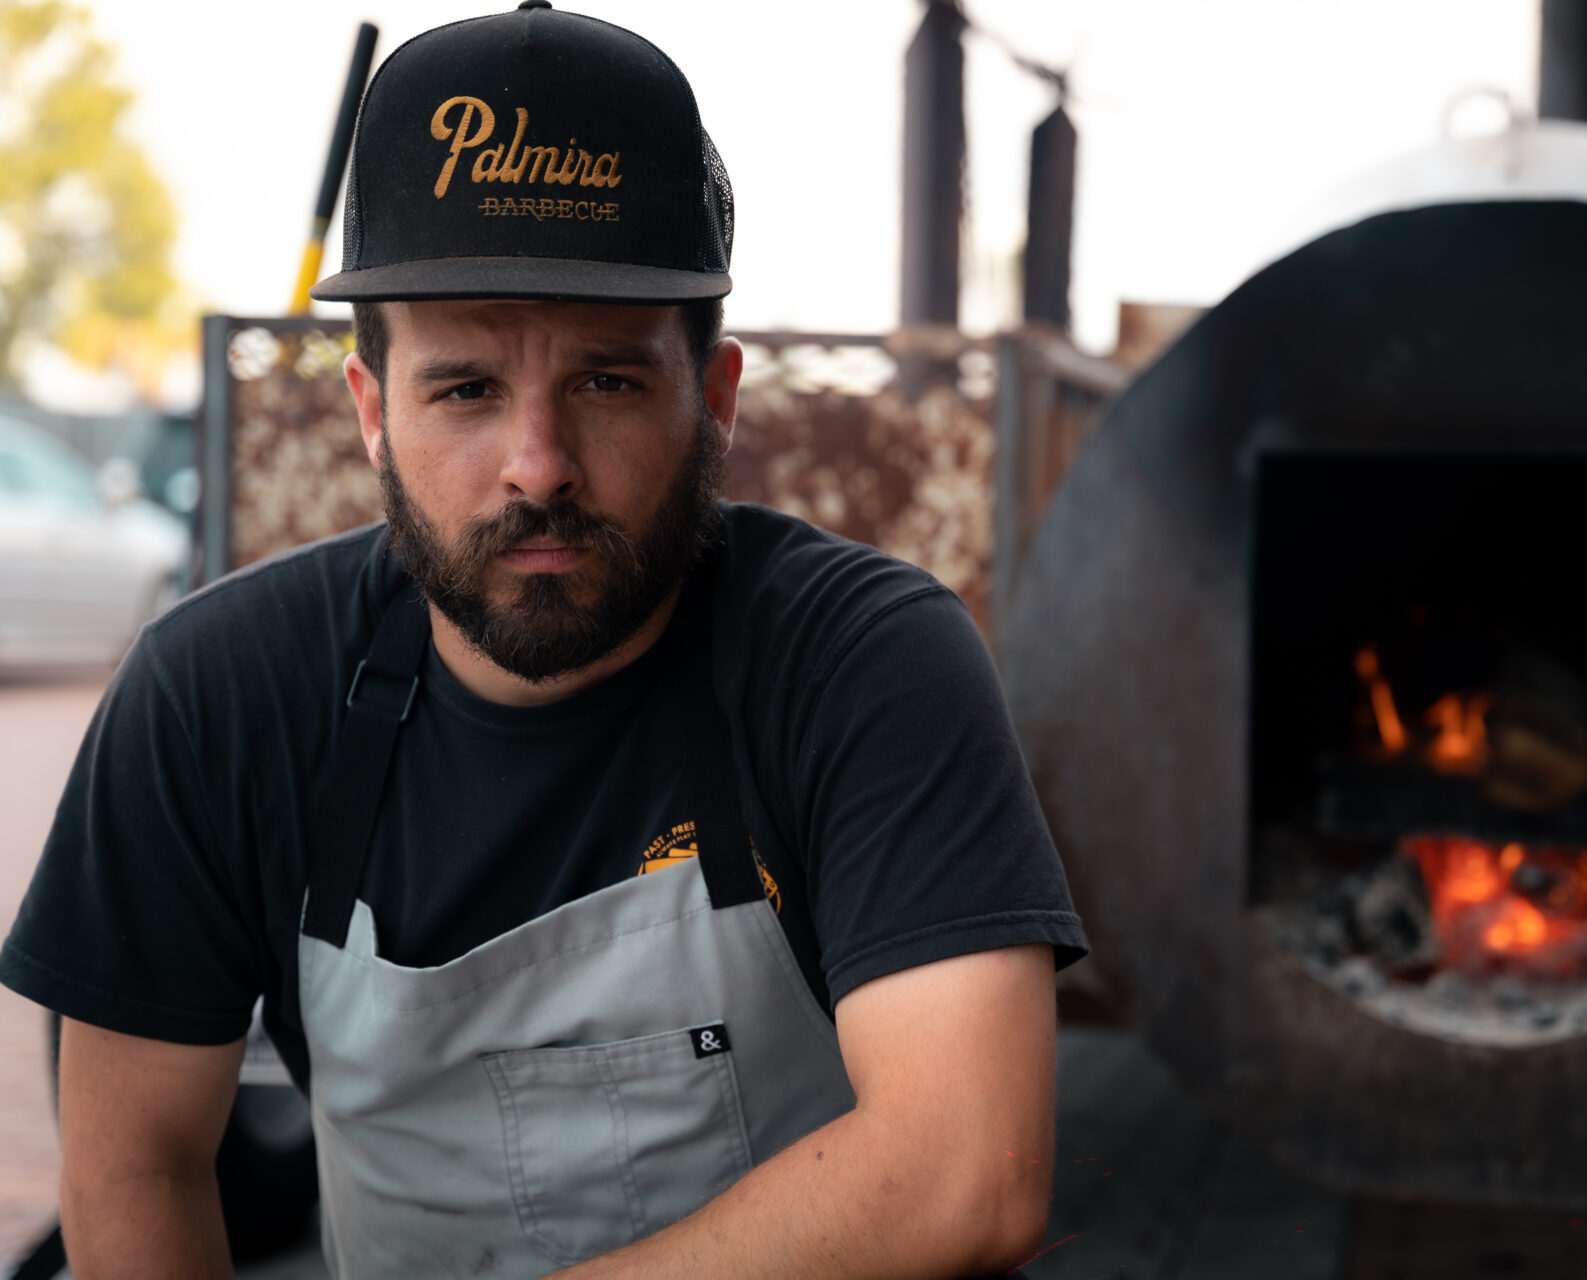 Palmira BBQ owner, one of our top 10 new restaurants opening 